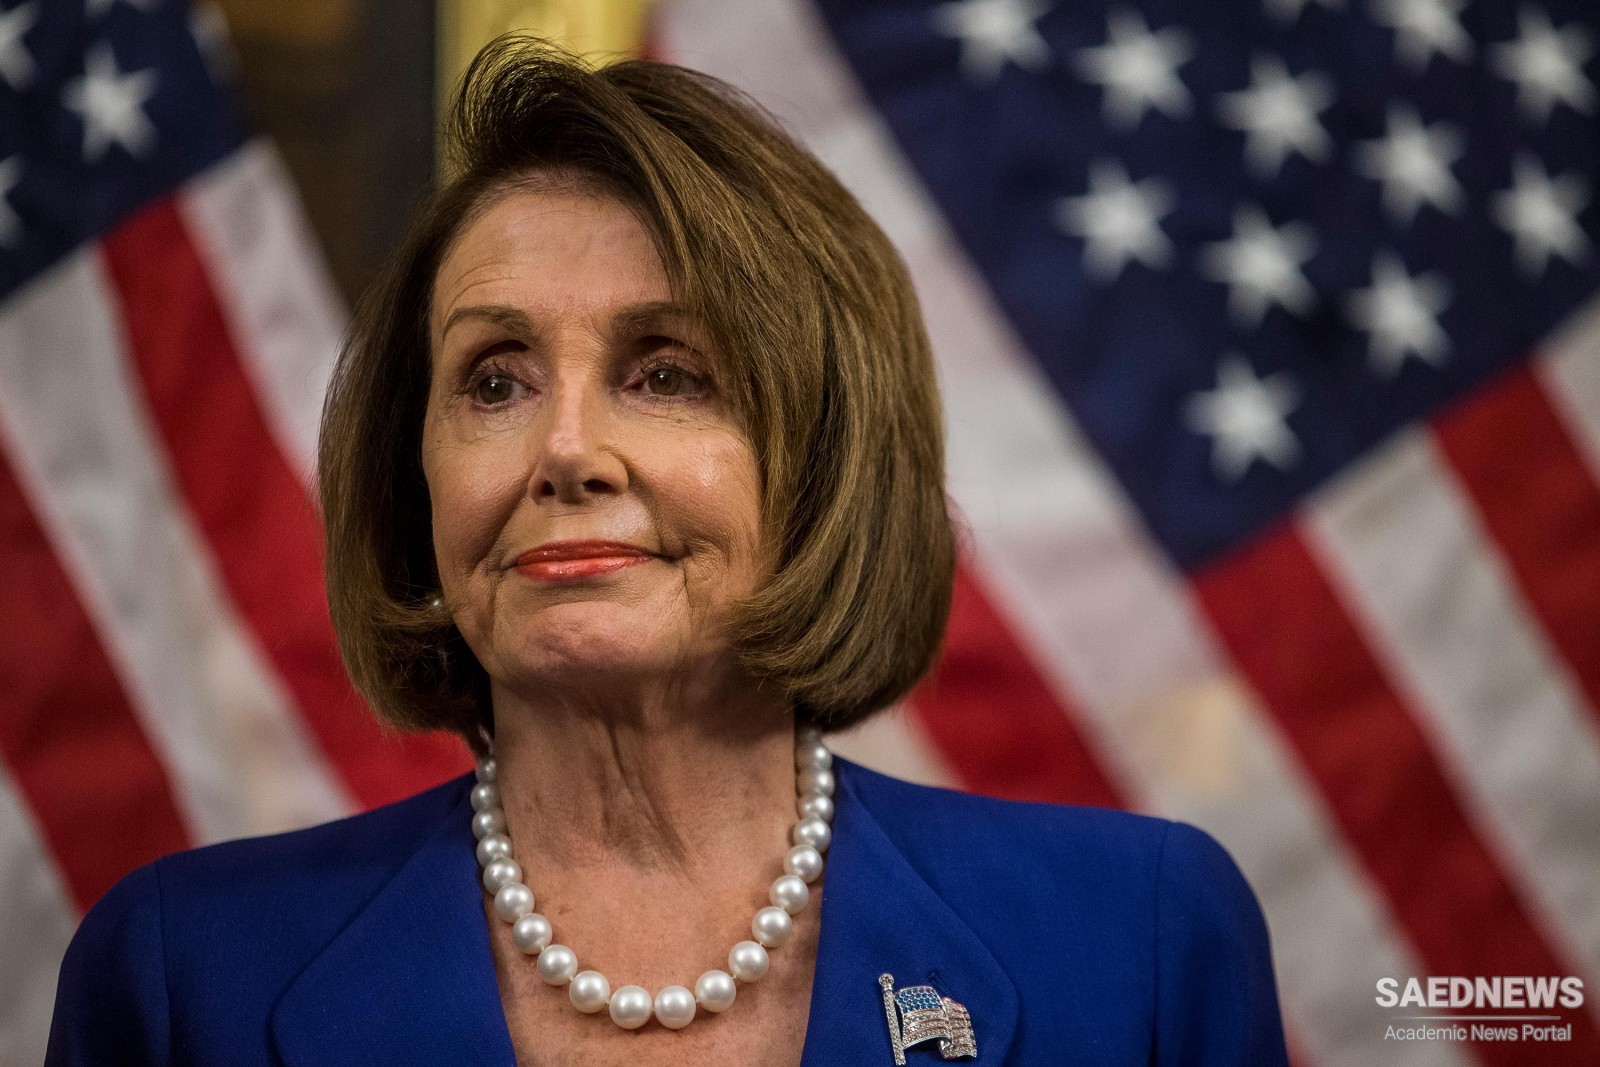 Early Celebration of Biden-Harris Presidential Victory: Pelosi Celebrated the New Era by a Statement